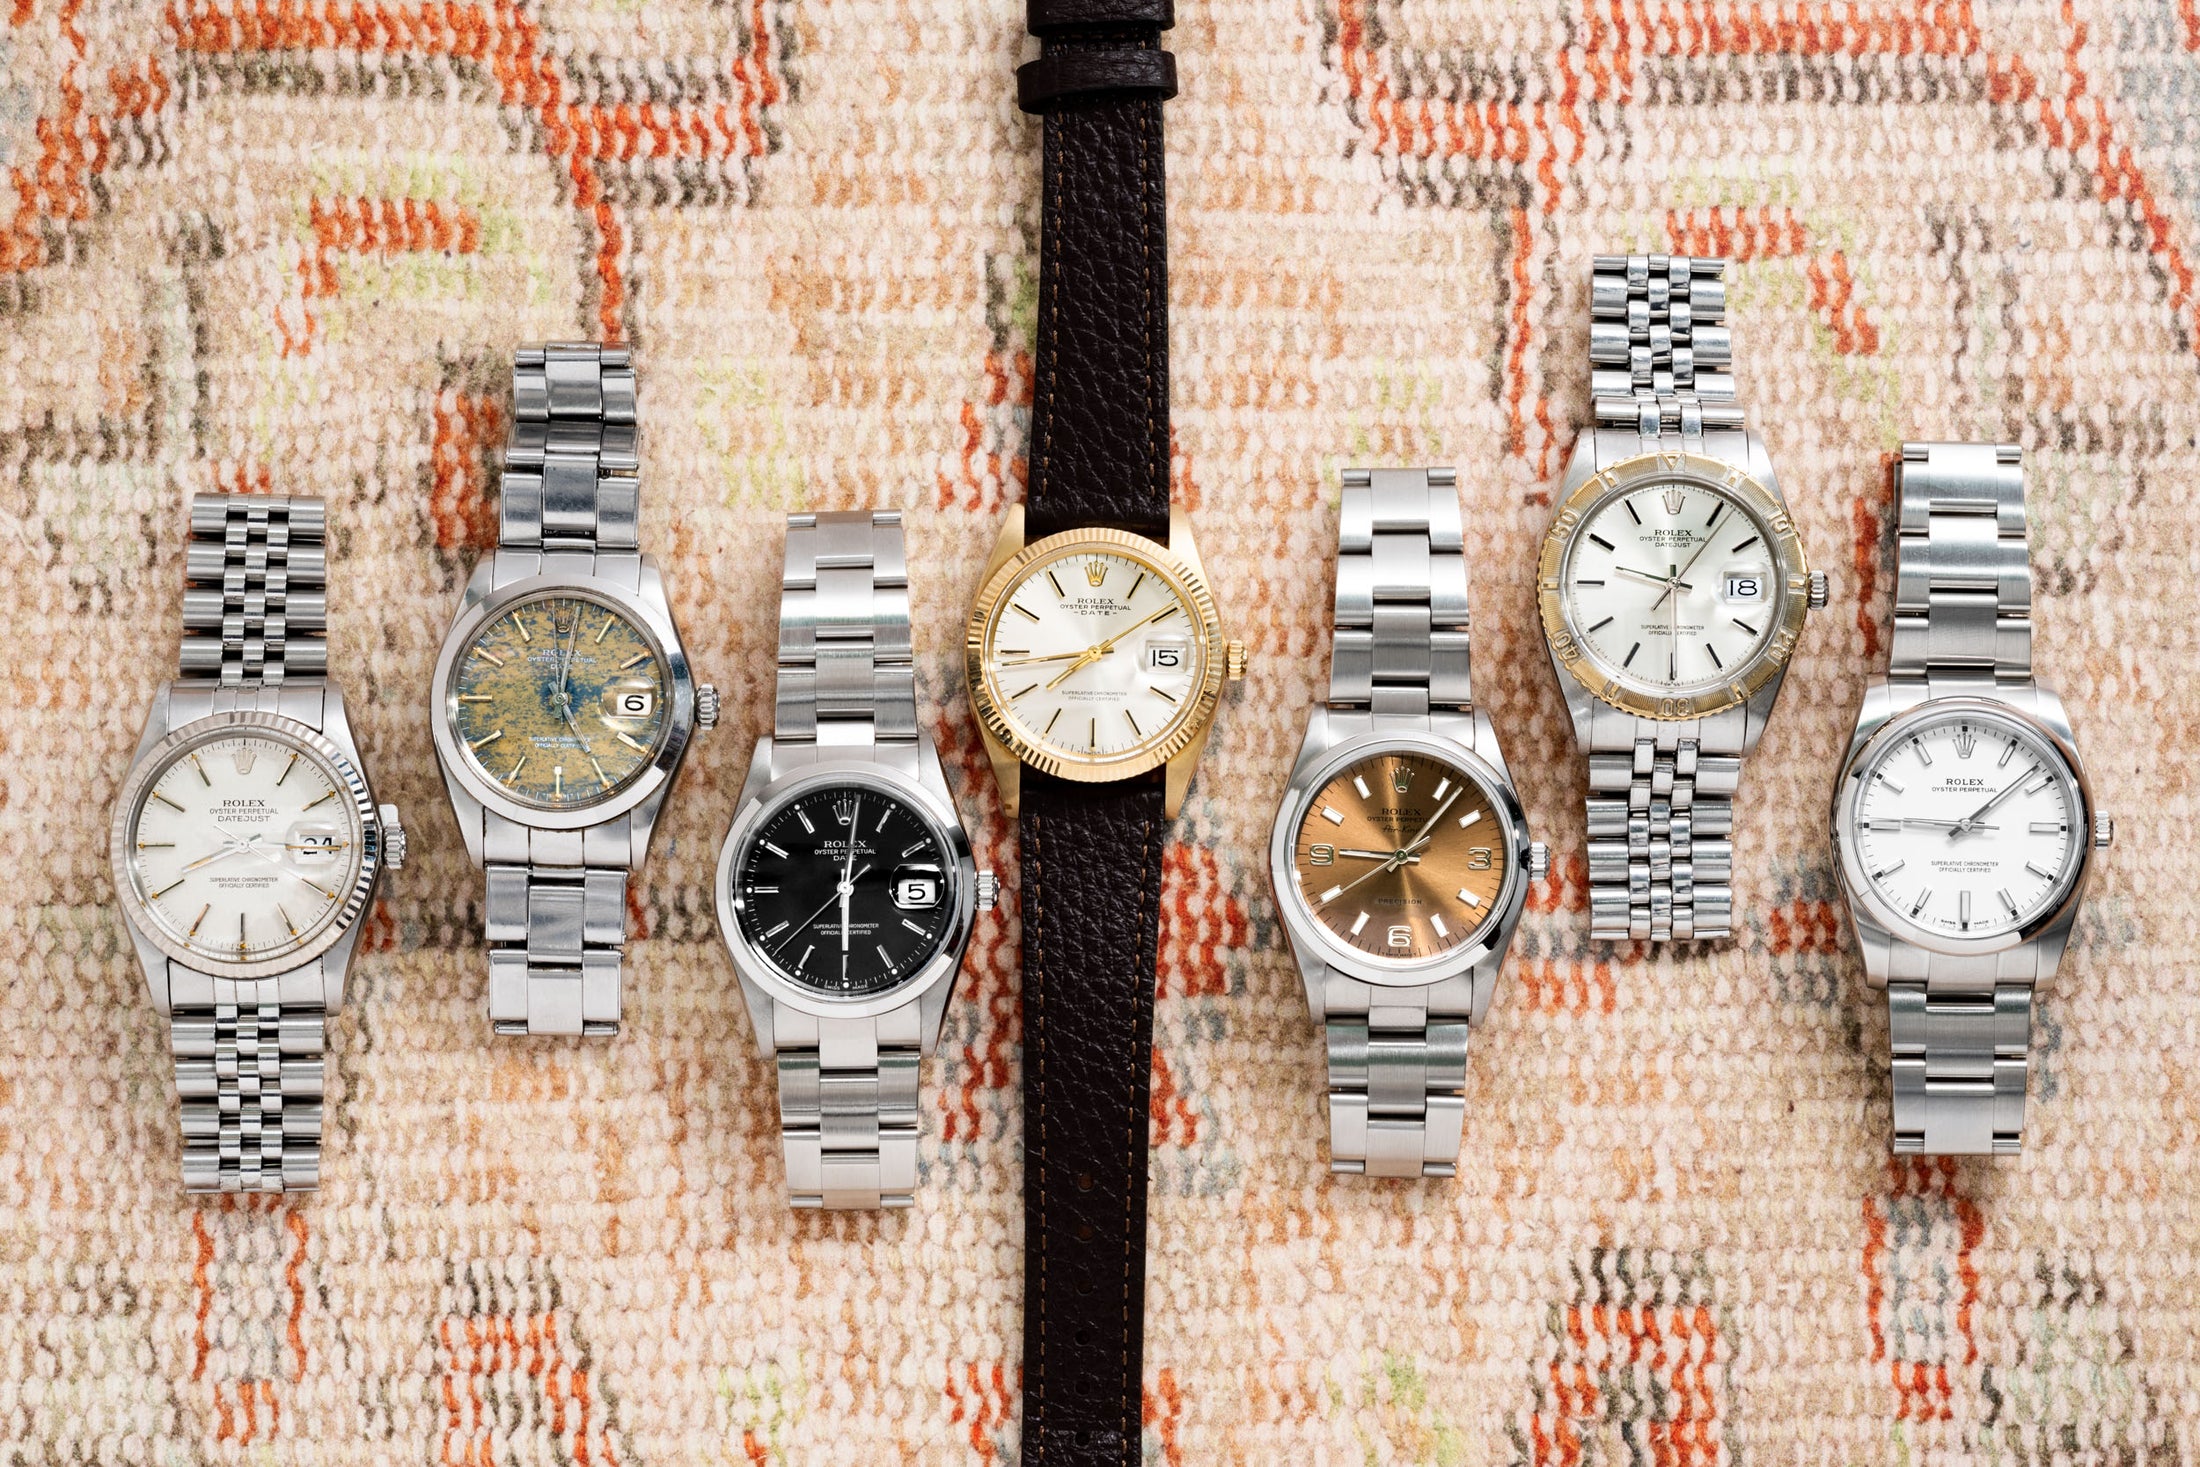 A Case for the 34mm Rolex: Value-Packed Pieces from “The Crown”